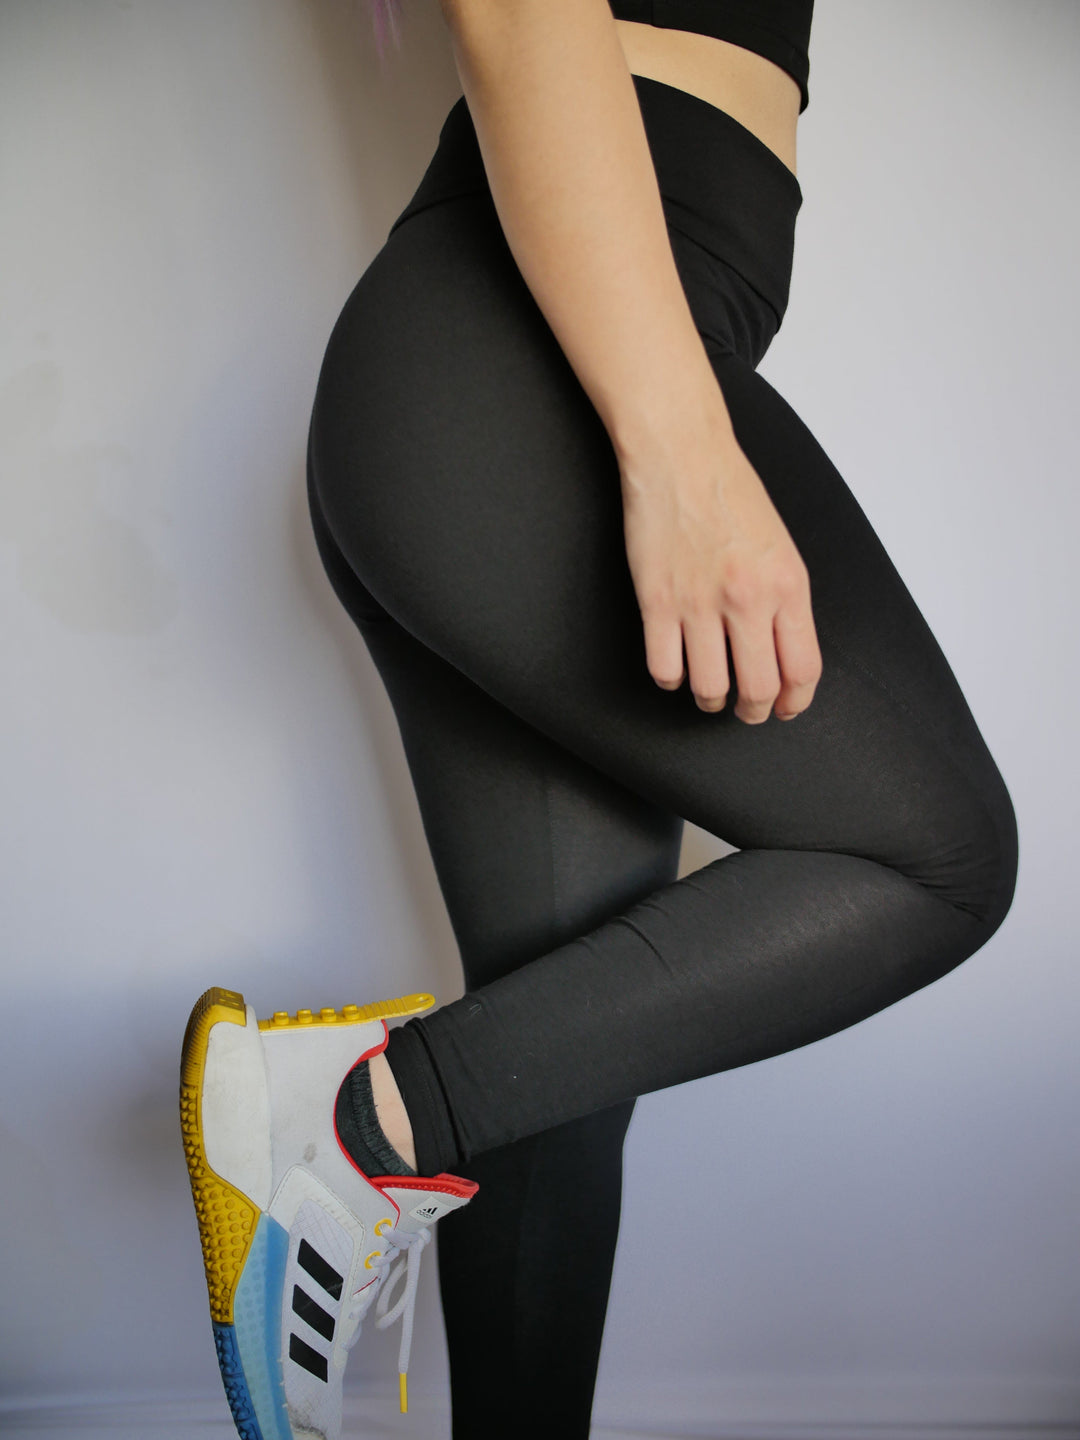 PixelThat Punderwear Yoga Pants Do You Want To Slither In? Yoga Pants